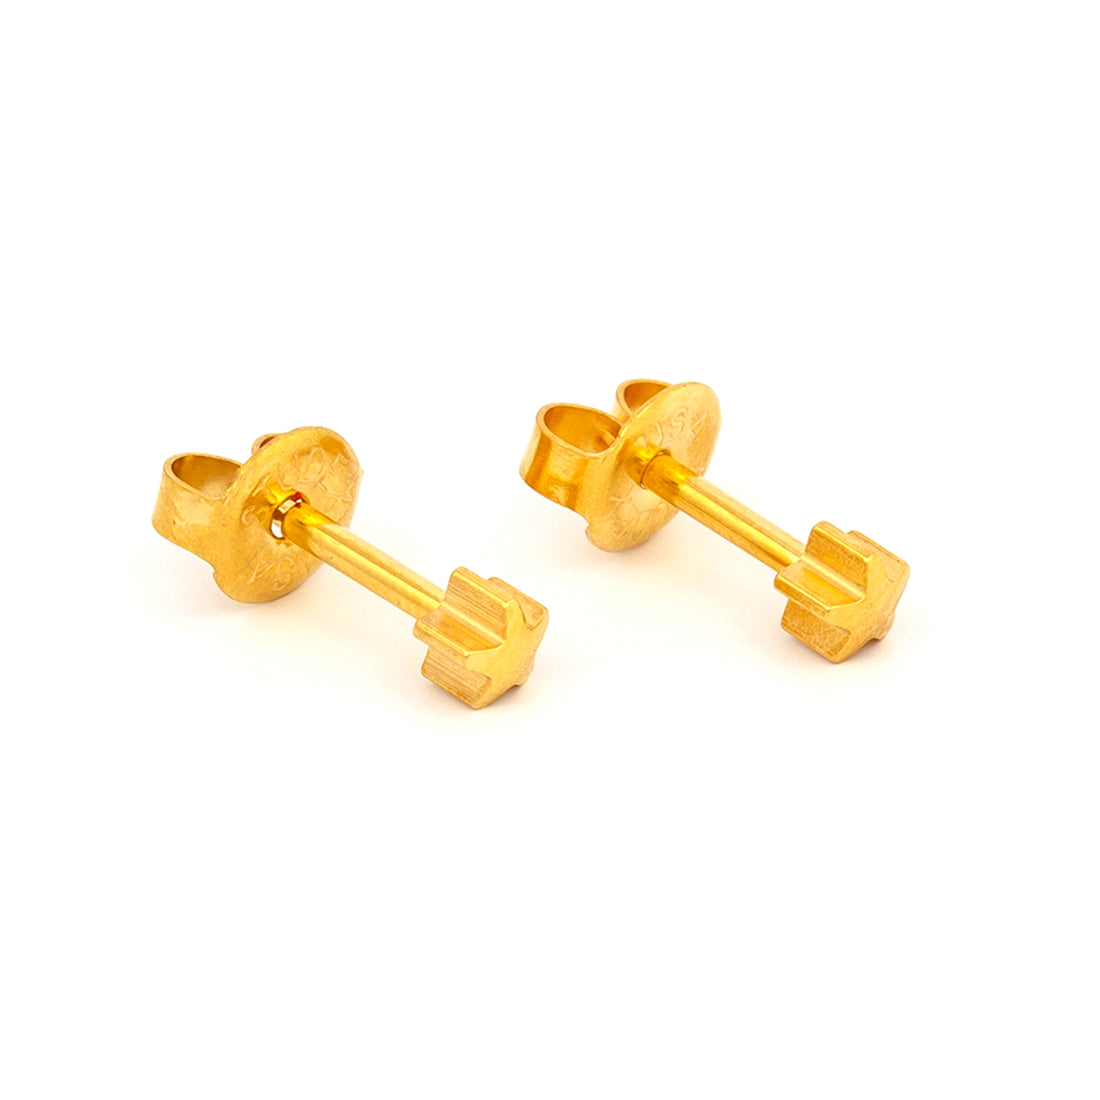 4MM Star 24K Pure Gold Plated Piercing Ear Stud